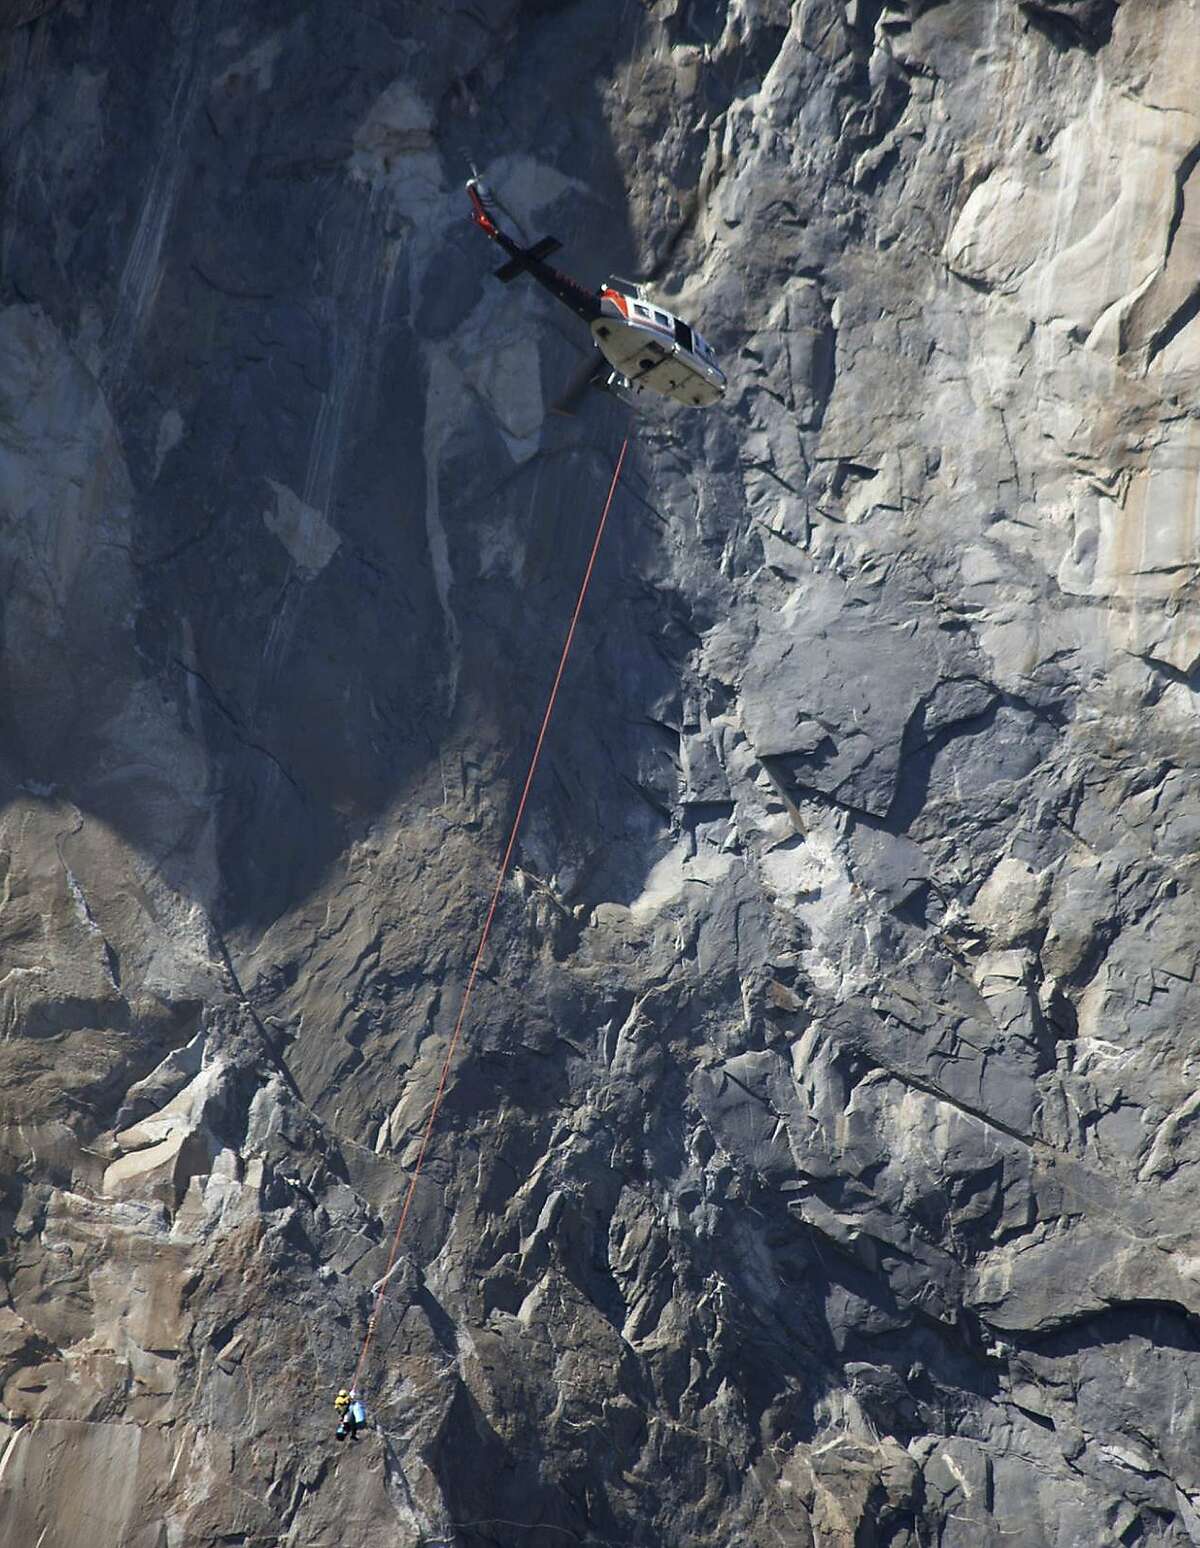 In this Wednesday Sept. 27, 2017, photo provided by Dakota Snider, photographer and Yosemite resident, a helicopter makes a rescue off El Capitan after a major rock fall in Yosemite National Park, Calif. All areas in California's Yosemite Valley are open Thursday, a day after the fatal rock fall. (Dakota Snider via AP)